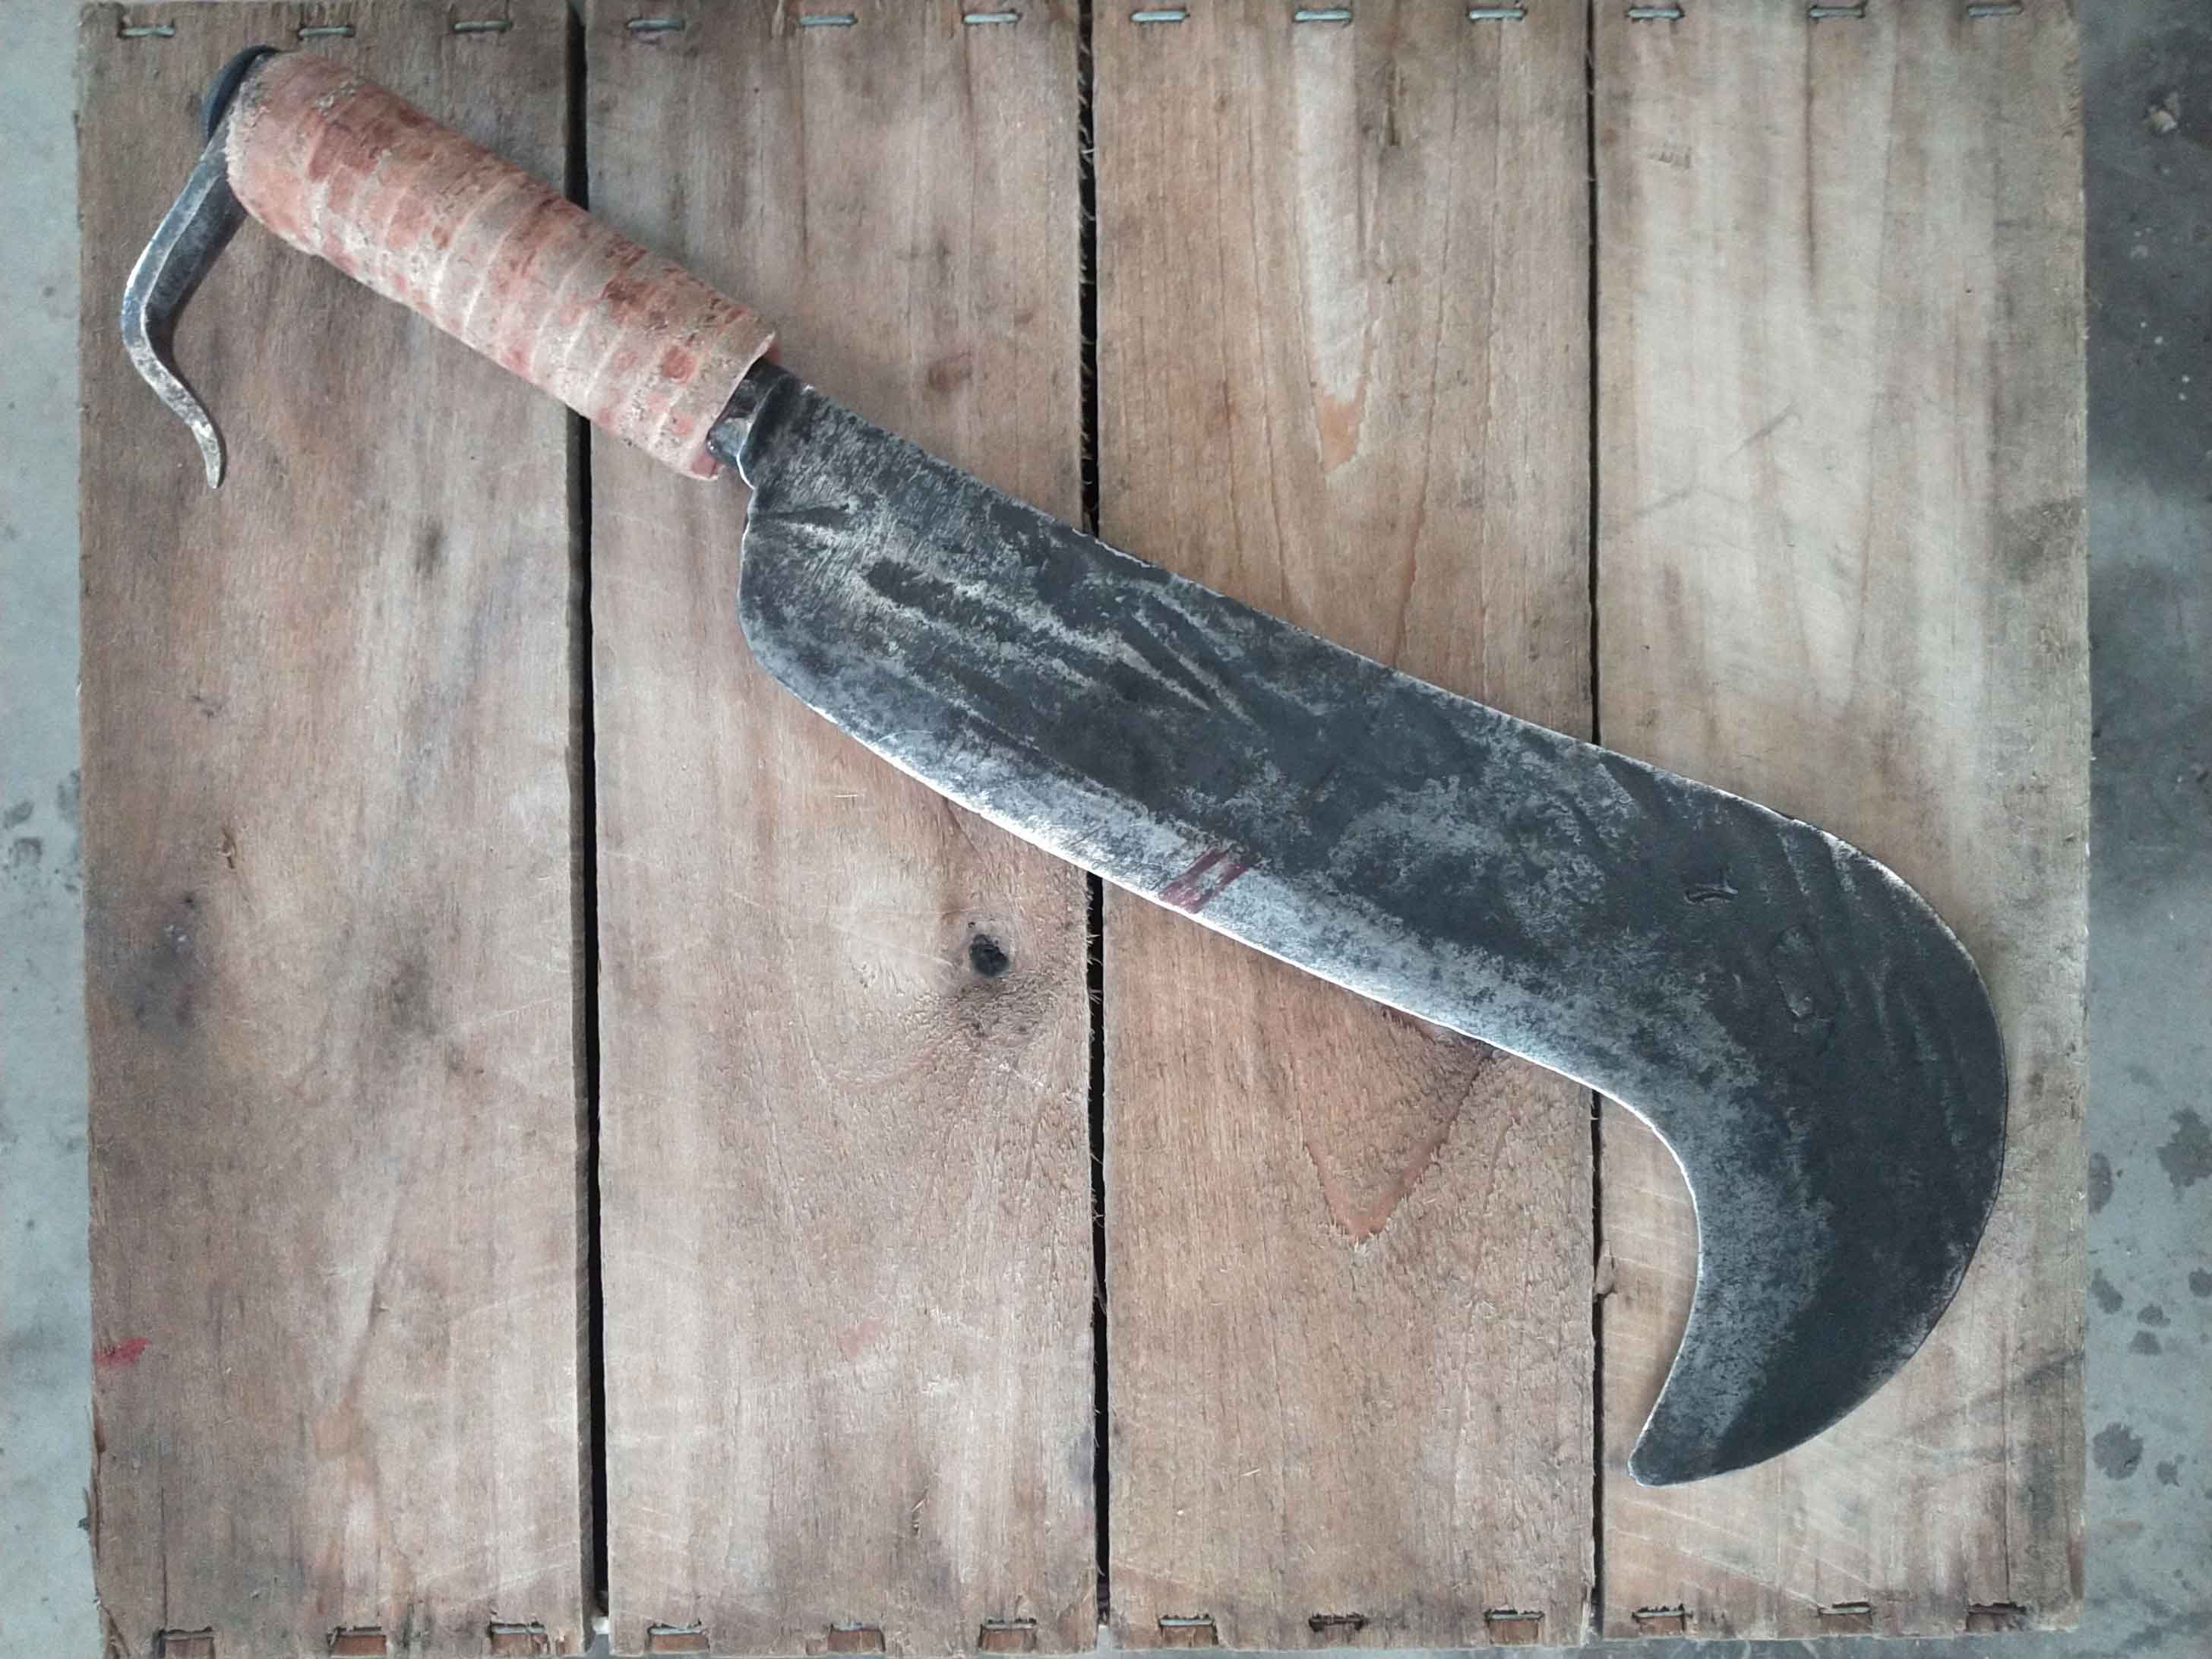 Vintage French-made billhook from 1917.